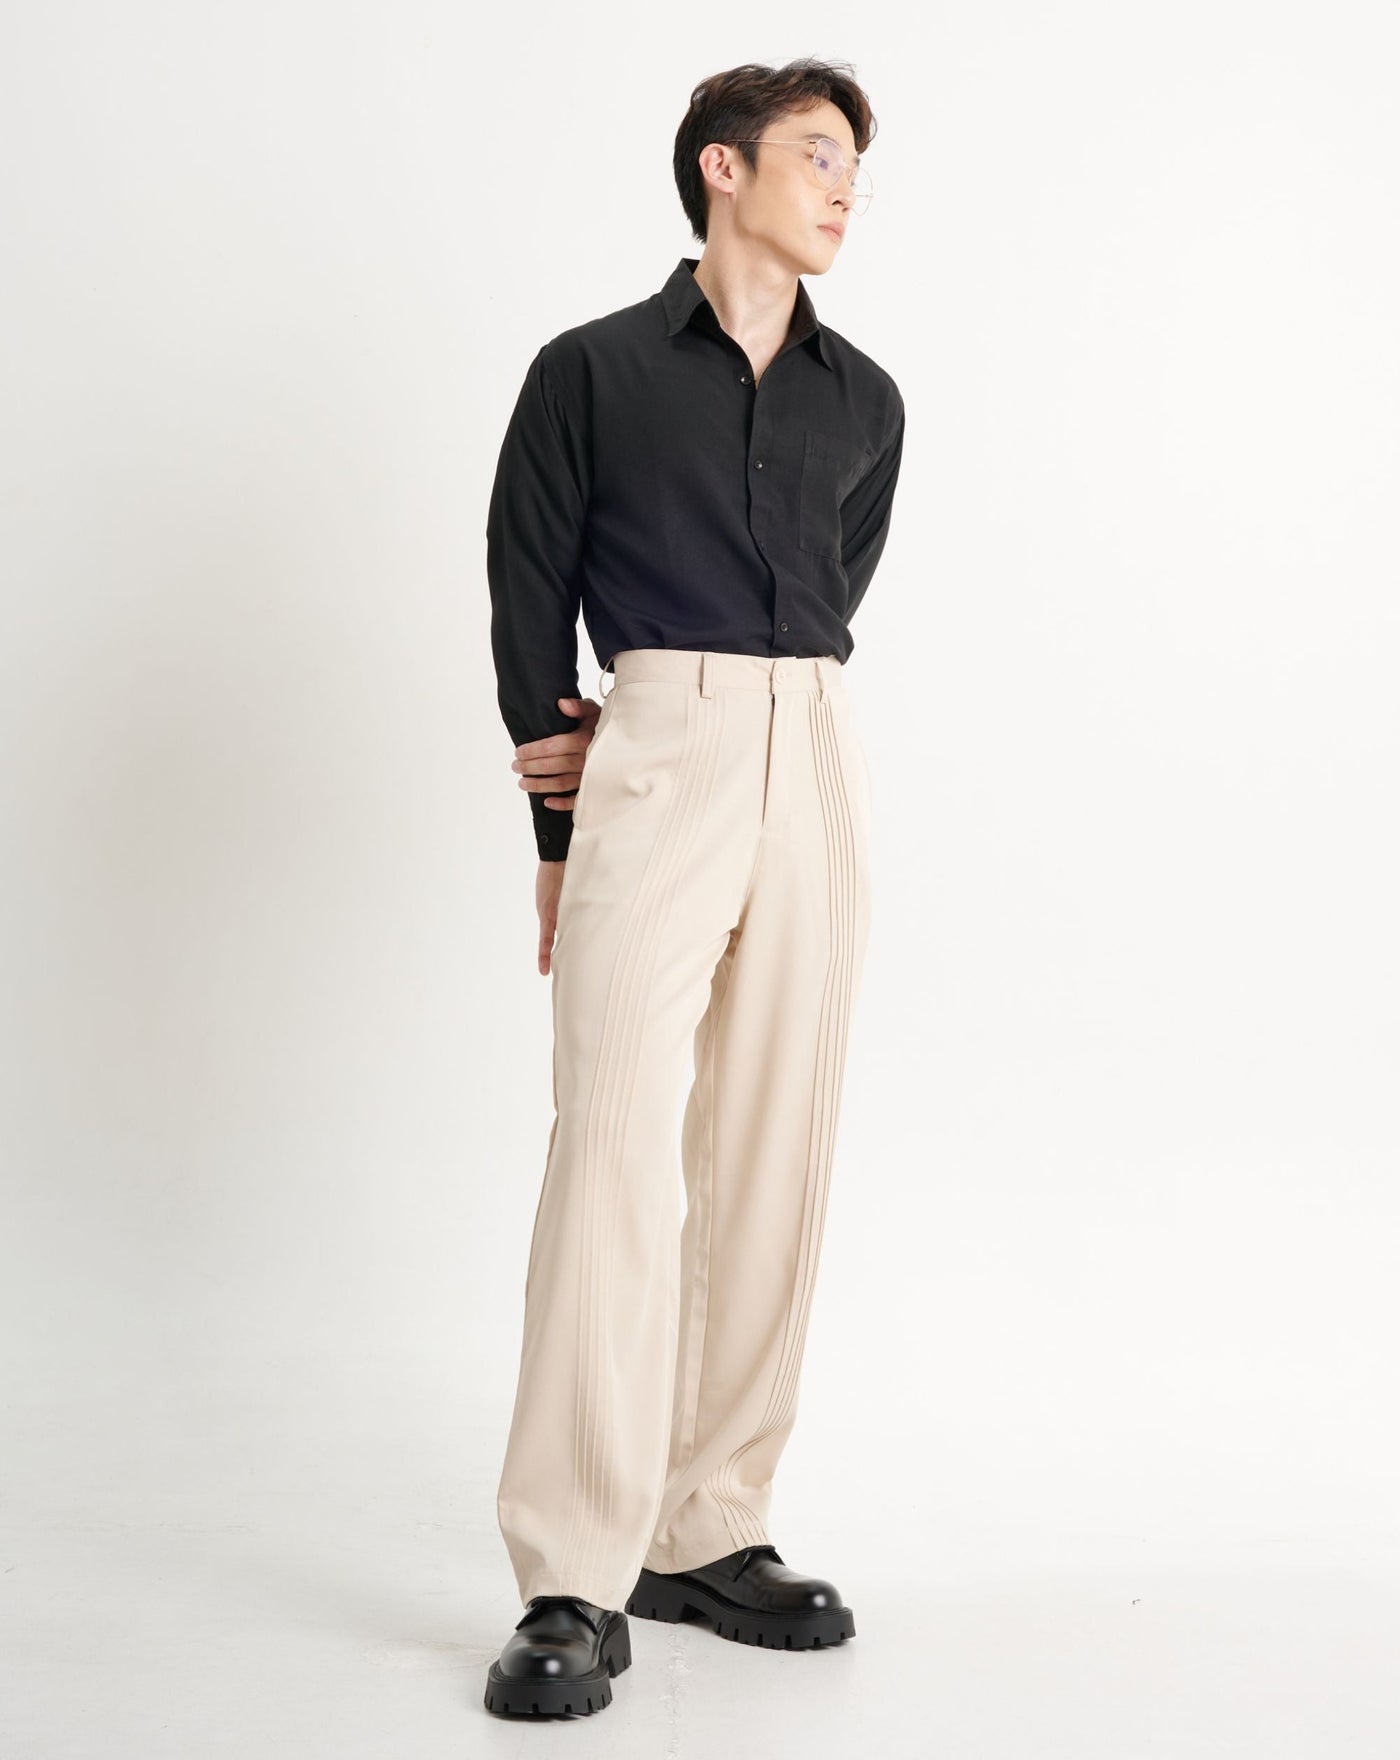 Off Duty - Korean Baggy Pants | Stylish clothes for women, Outfits, Baggy  pants outfit